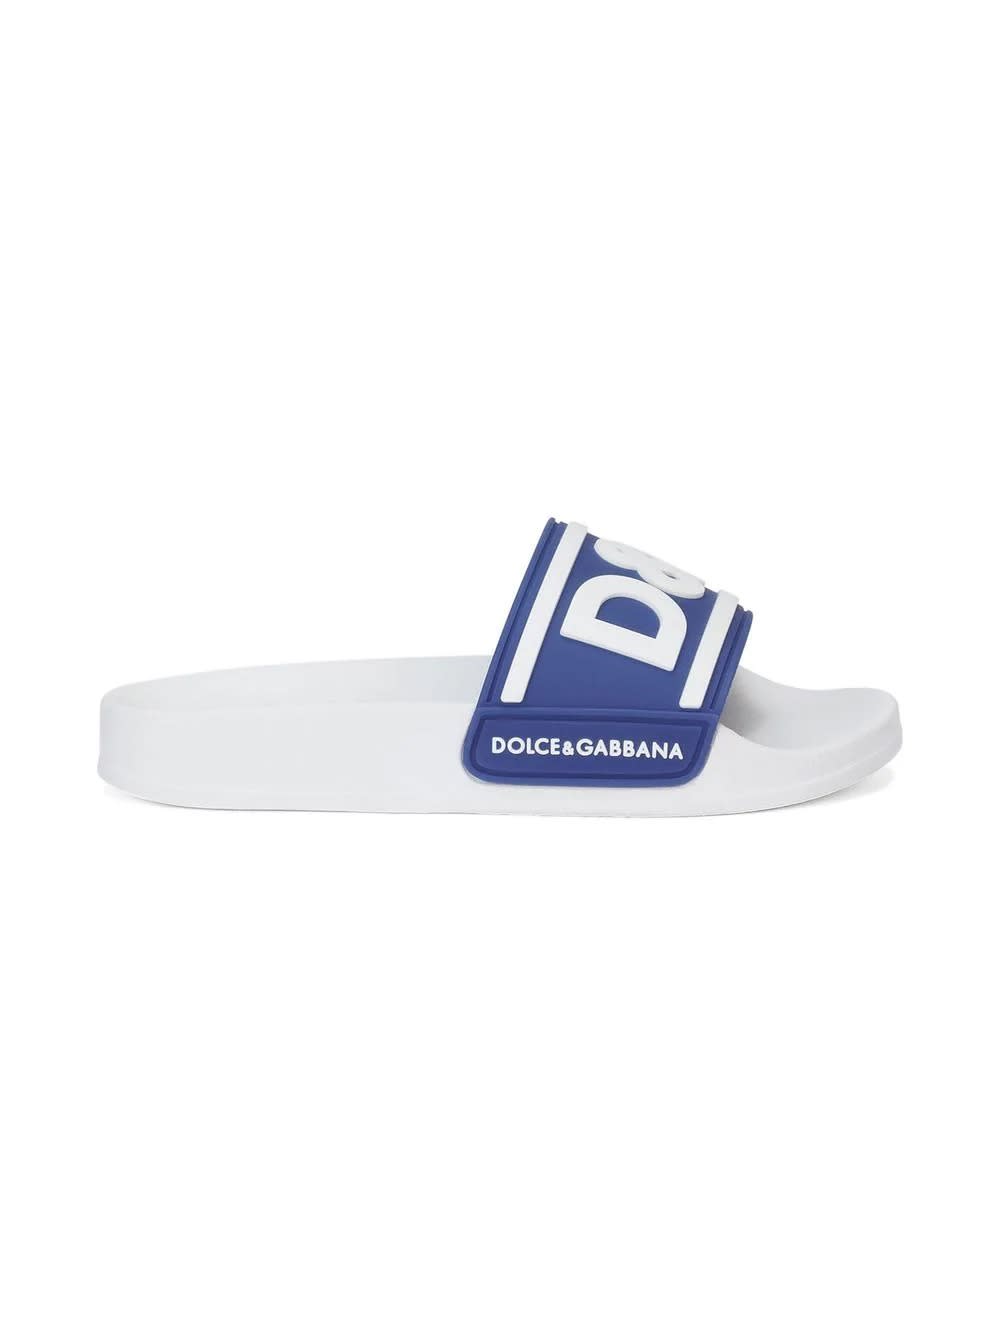 Dolce & Gabbana White And Blue Rubber Slide With Logo Print